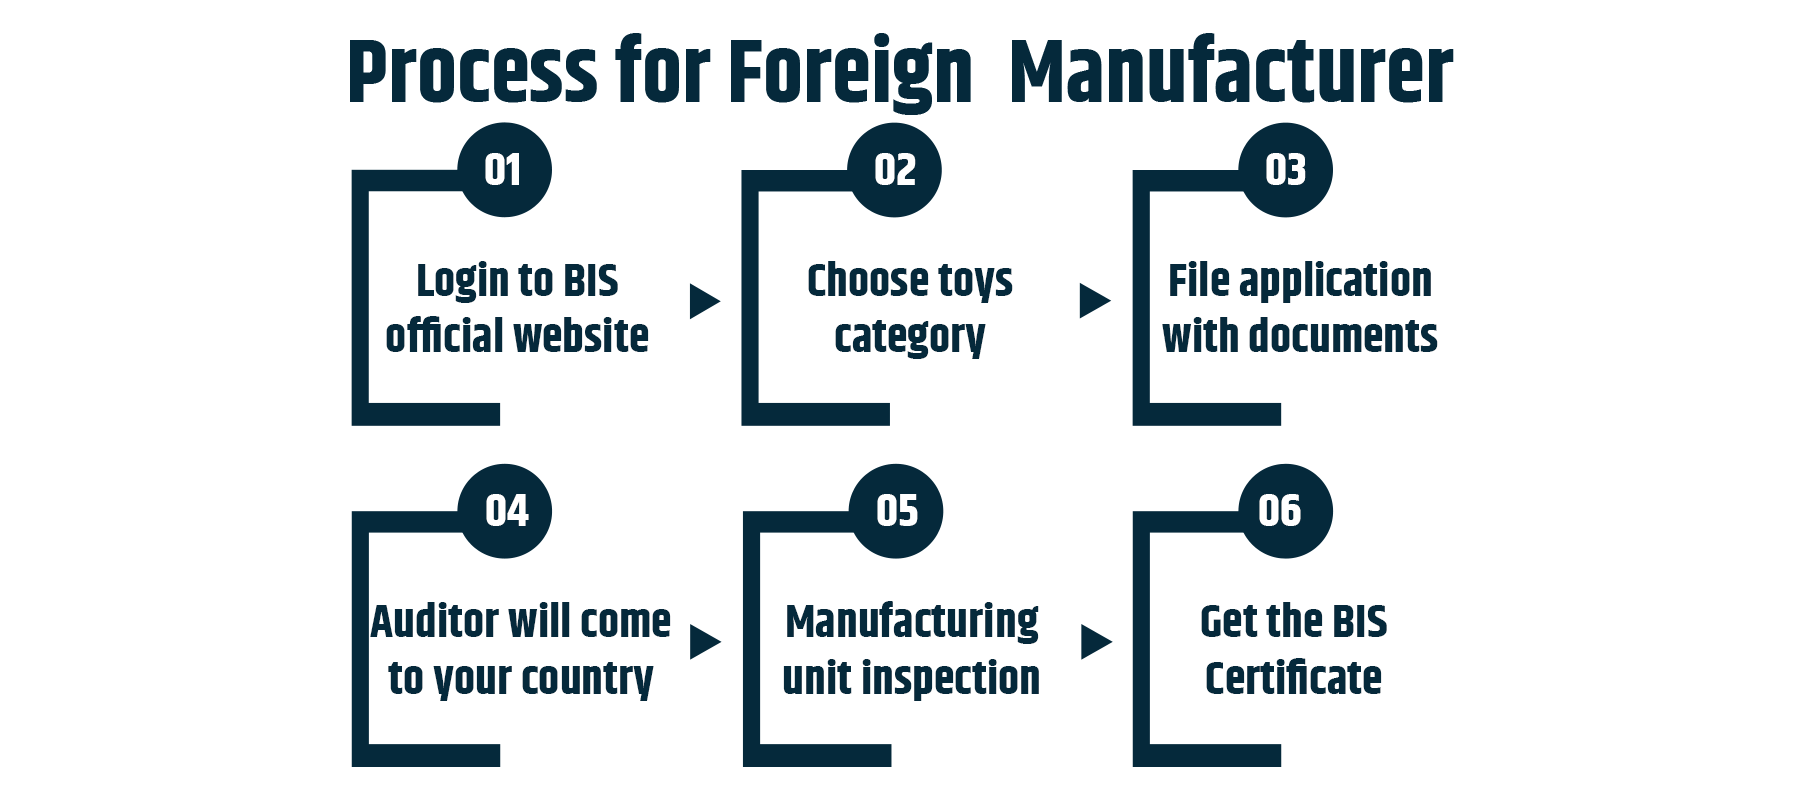 If you are a Non-Domestic Toys manufacture, it is essential to complete the following procedures in order to acquire a BIS certificate.